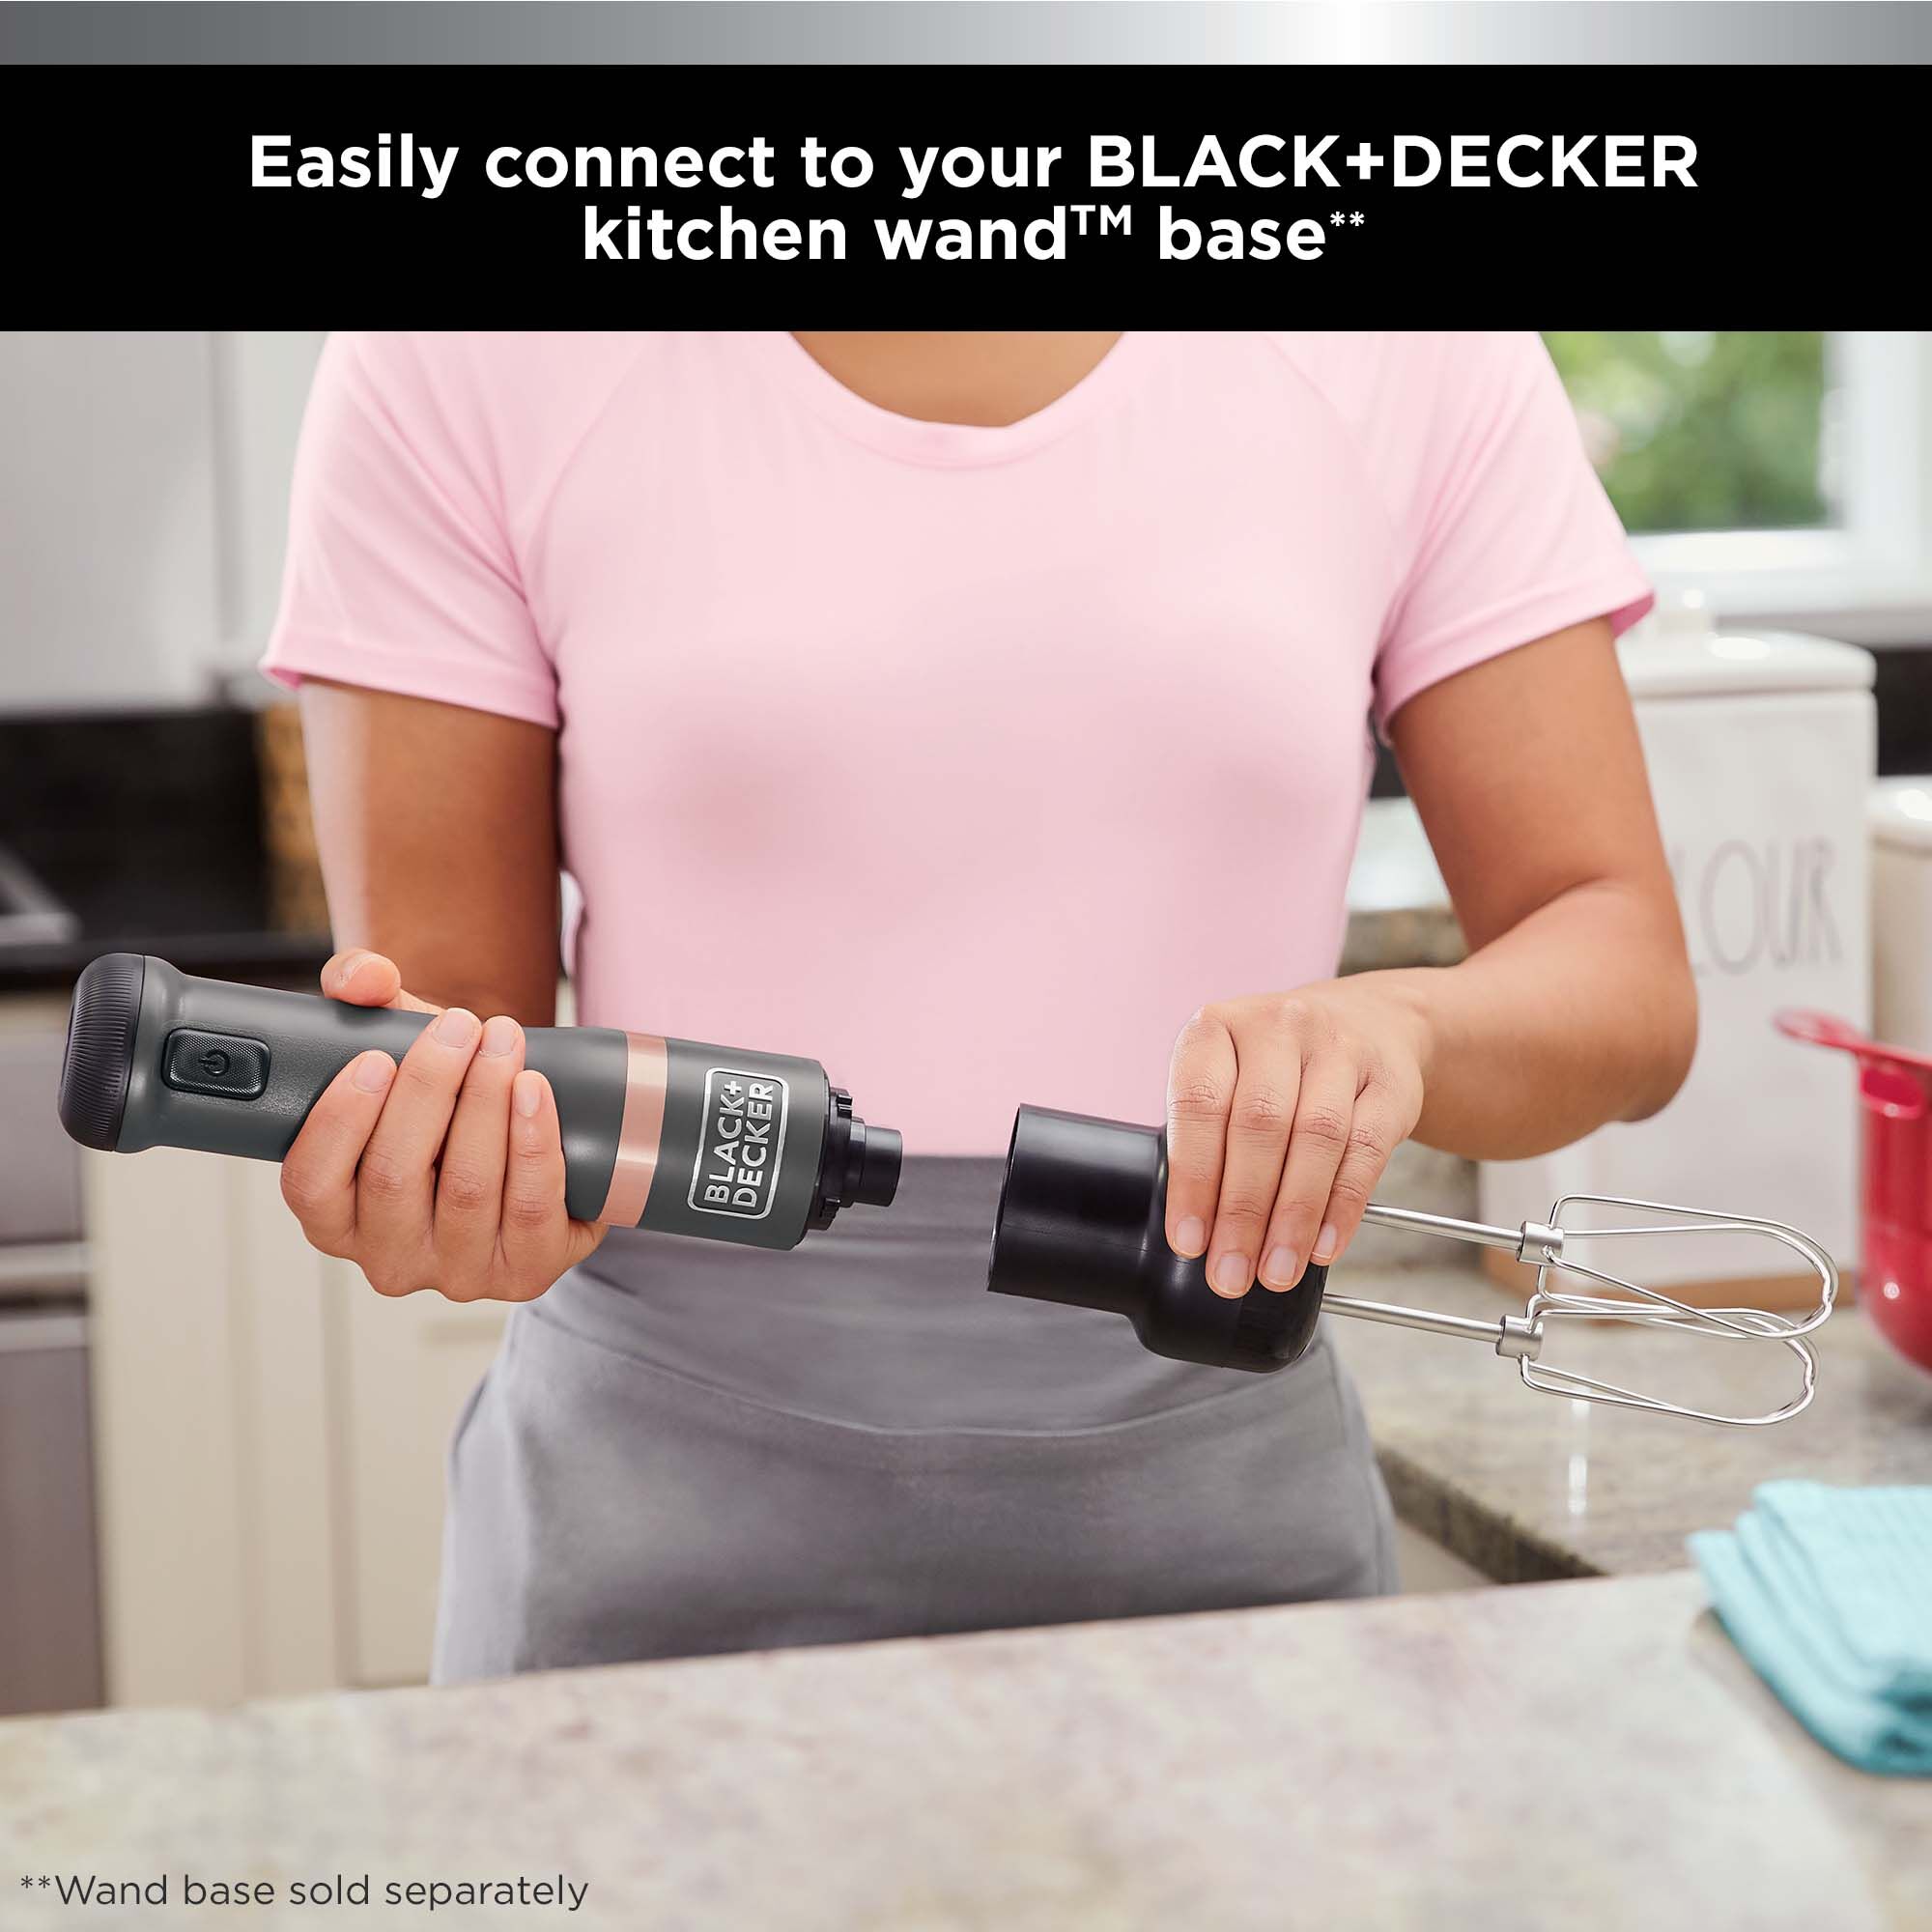 Easily connect the BLACK+DECKER kitchen wand™ hand mixer attachment to your wand base, talent using grey wand base